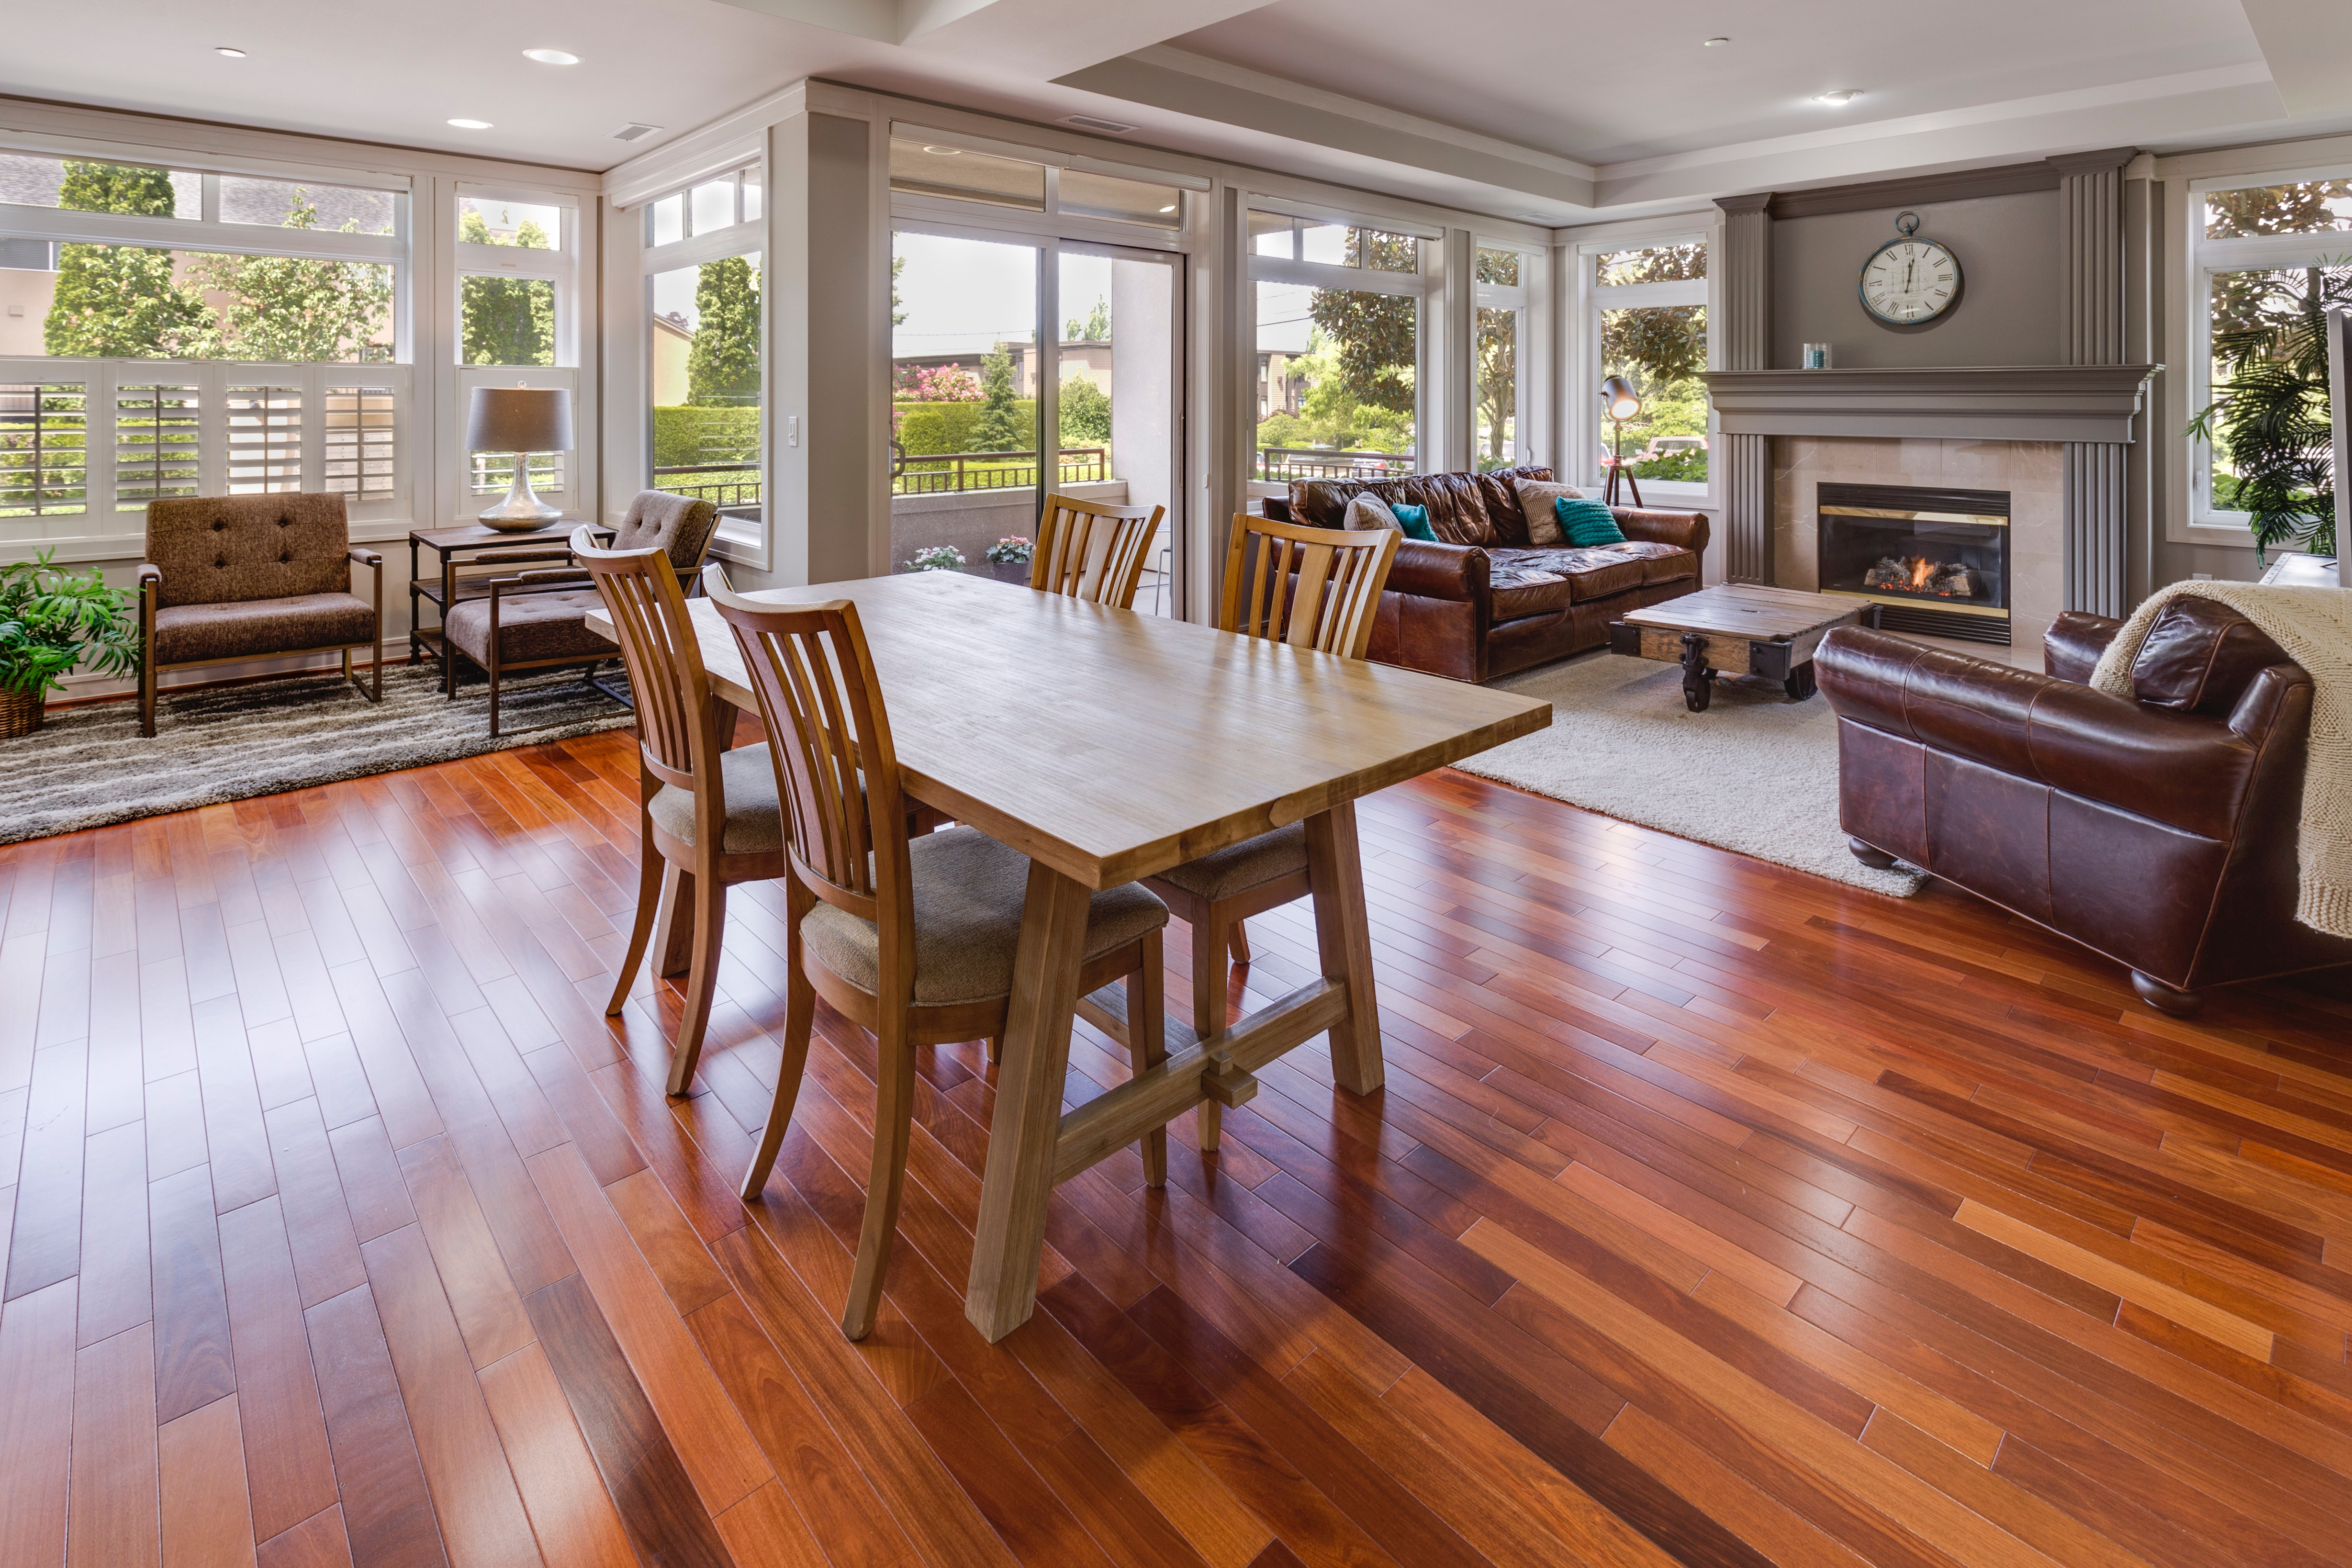 Laminate Flooring Installation Cost: What's a Fair Price?